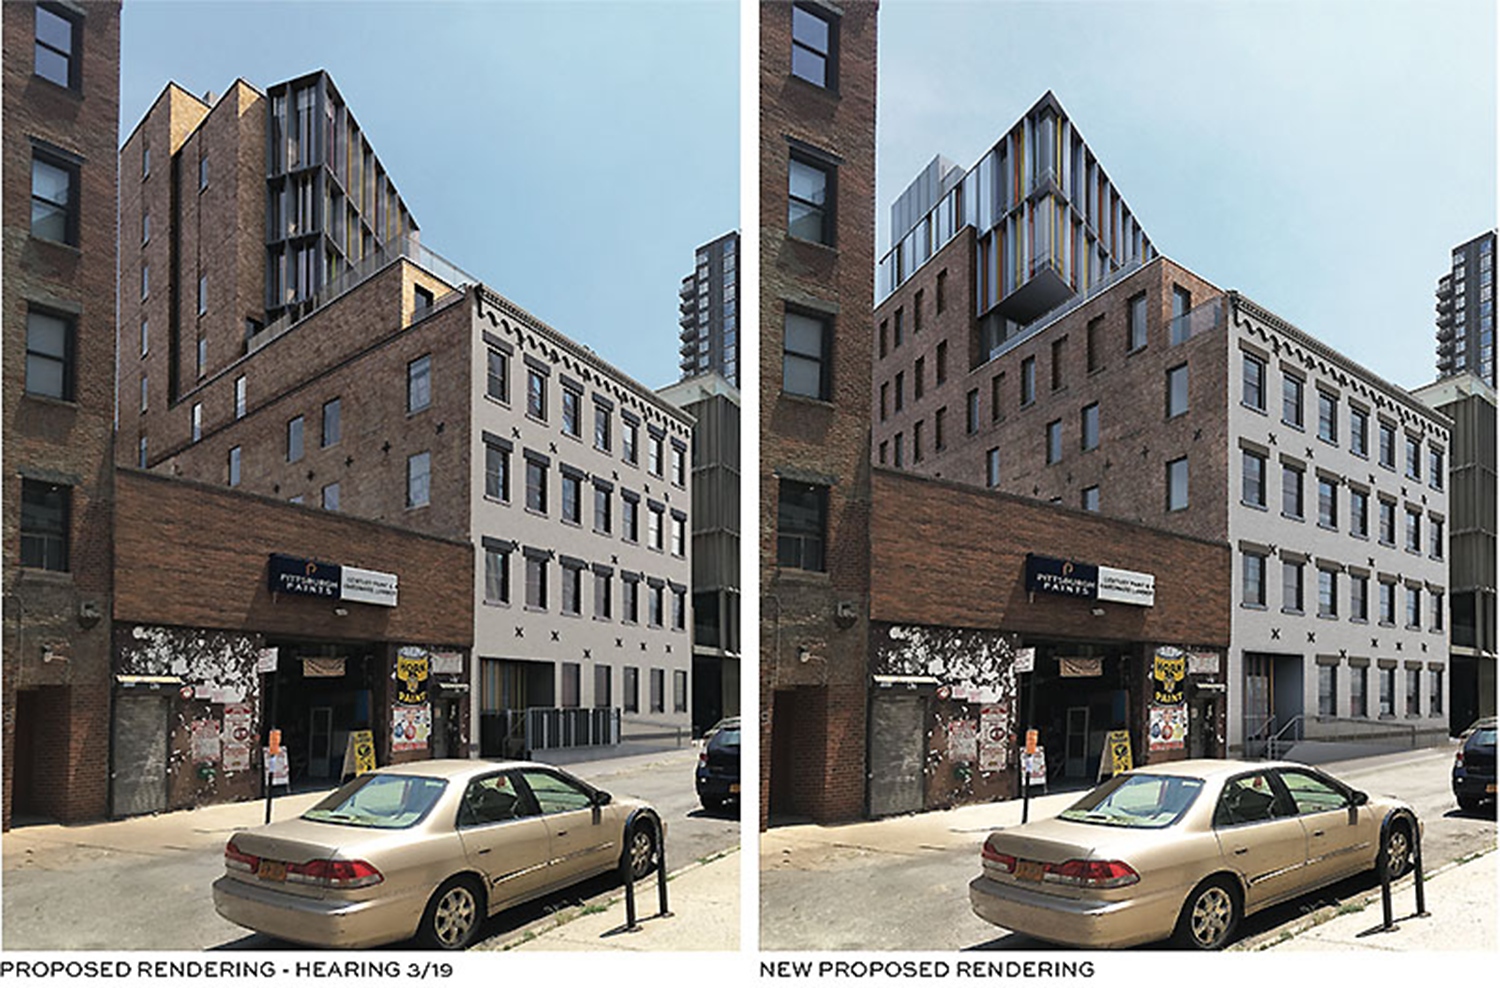 Originally proposed (left) and previously approved renderings (right) of 53 Pearl Street from BKSK Architects. The ADA ramp illustrated will no longer be constructed.